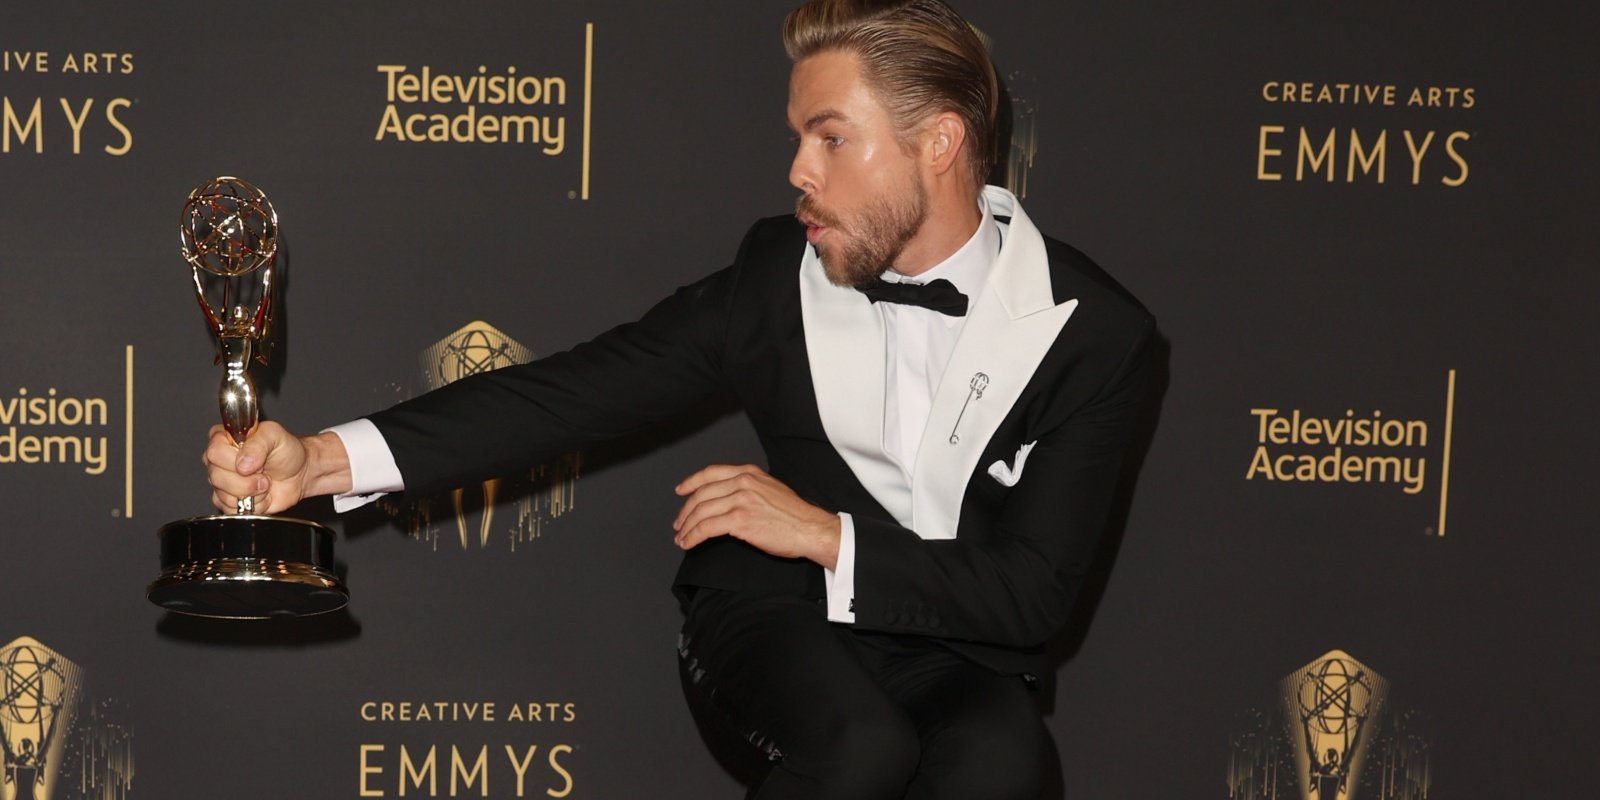 Derek Hough poses with the award for Outstanding Choreography for Variety or Reality Programming for "Dancing With The Stars" at the Creative Arts Emmys at Microsoft Theater on September 12, 2021 in Los Angeles, California.